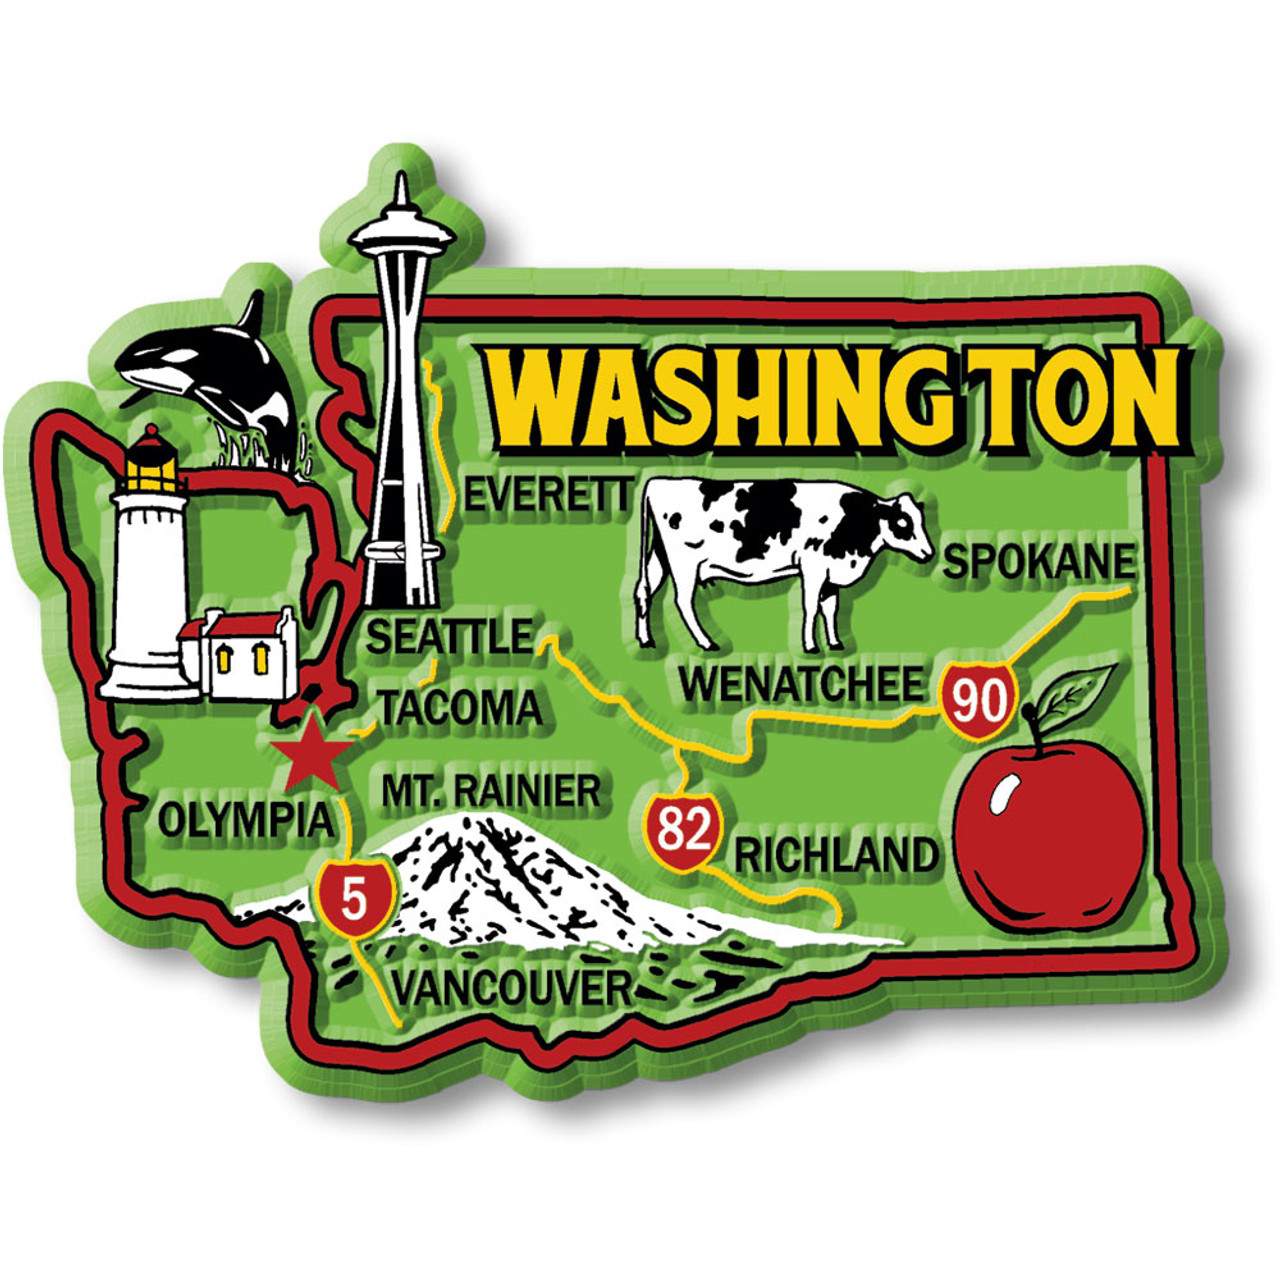 Made in USA Washington Premium State Magnet by Classic Magnets 2.6" x 1.8" 